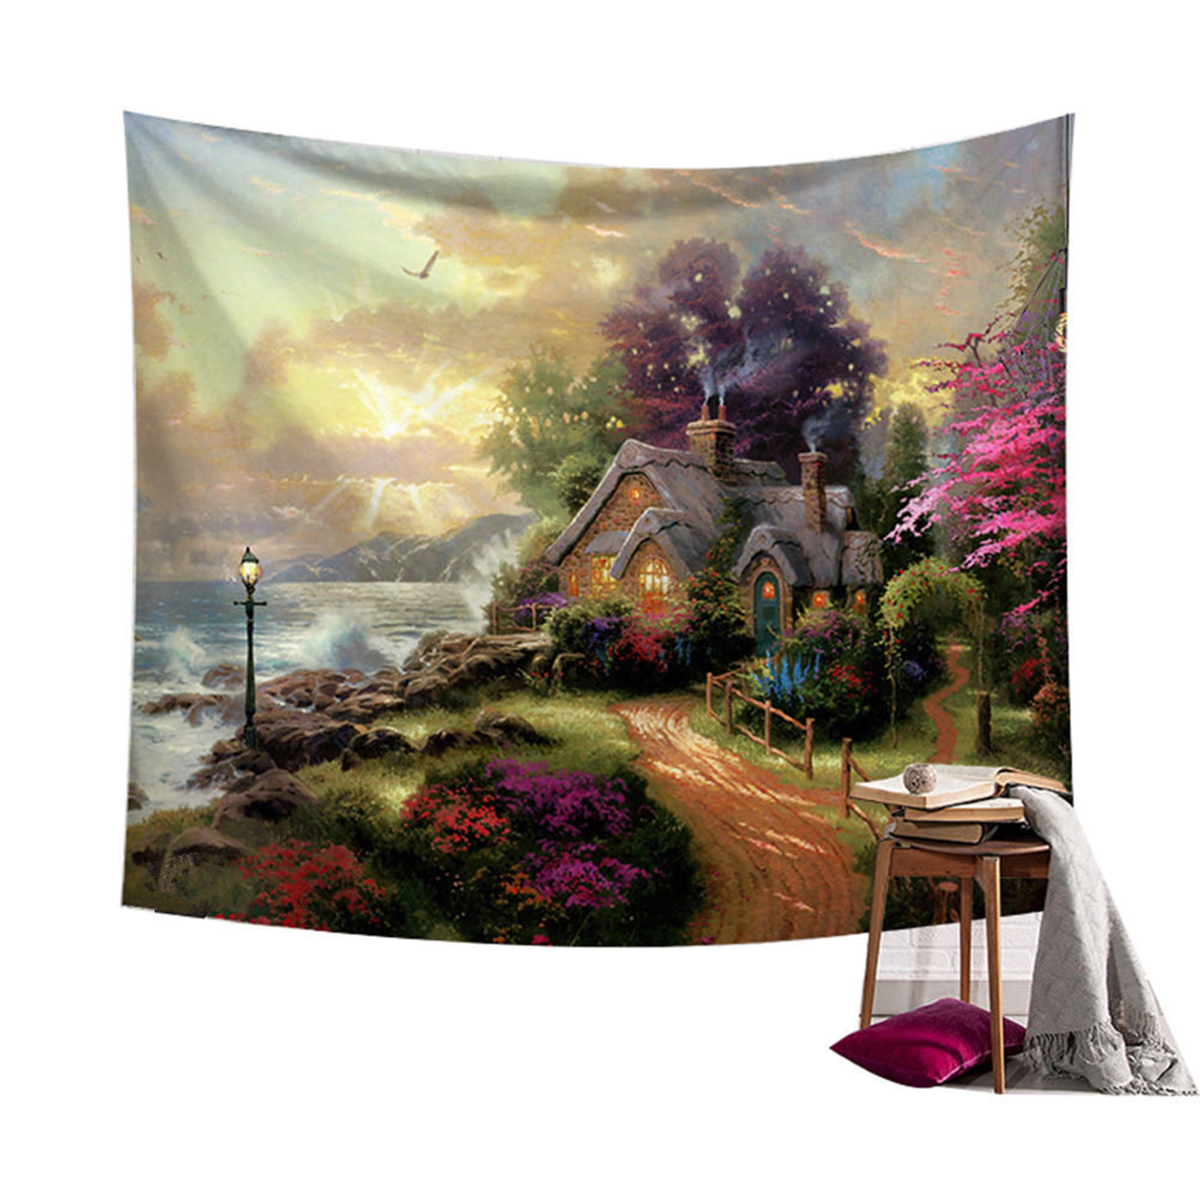 Fairy-Forest-Hanging-Wall-Tapestry-Bohemian-Hippie-Throw-Bedspread-Home-Decorations-1309251-4